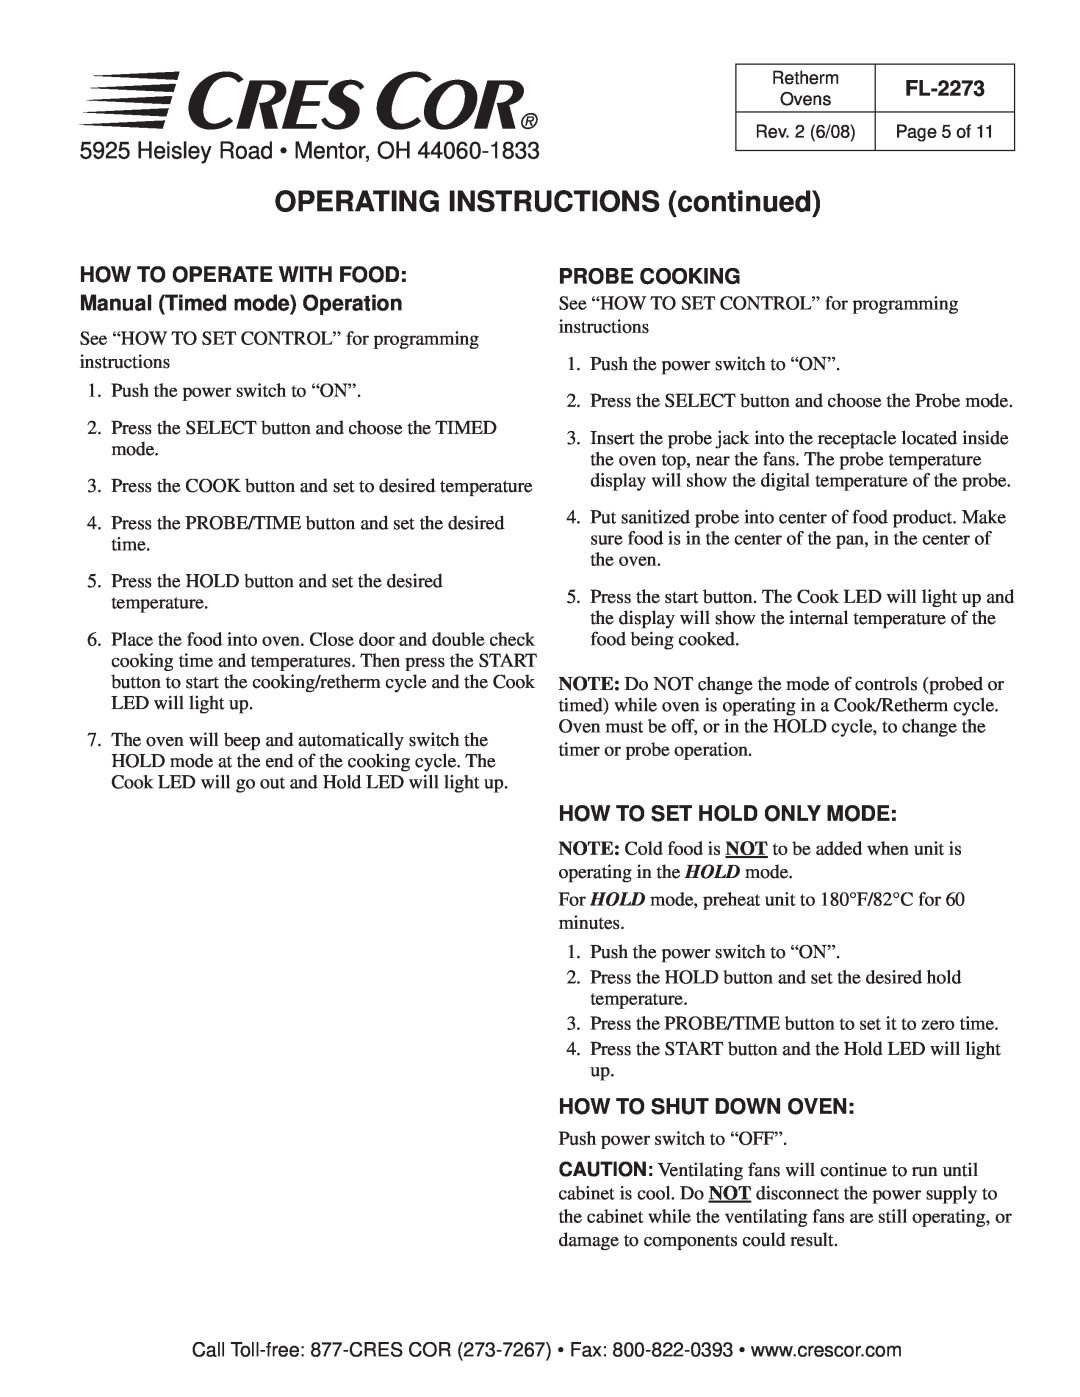 Cres Cor RR-1332 Series Retherm Ovens OPERATING INSTRUCTIONS continued, Heisley Road Mentor, OH, FL-2273, Probe Cooking 